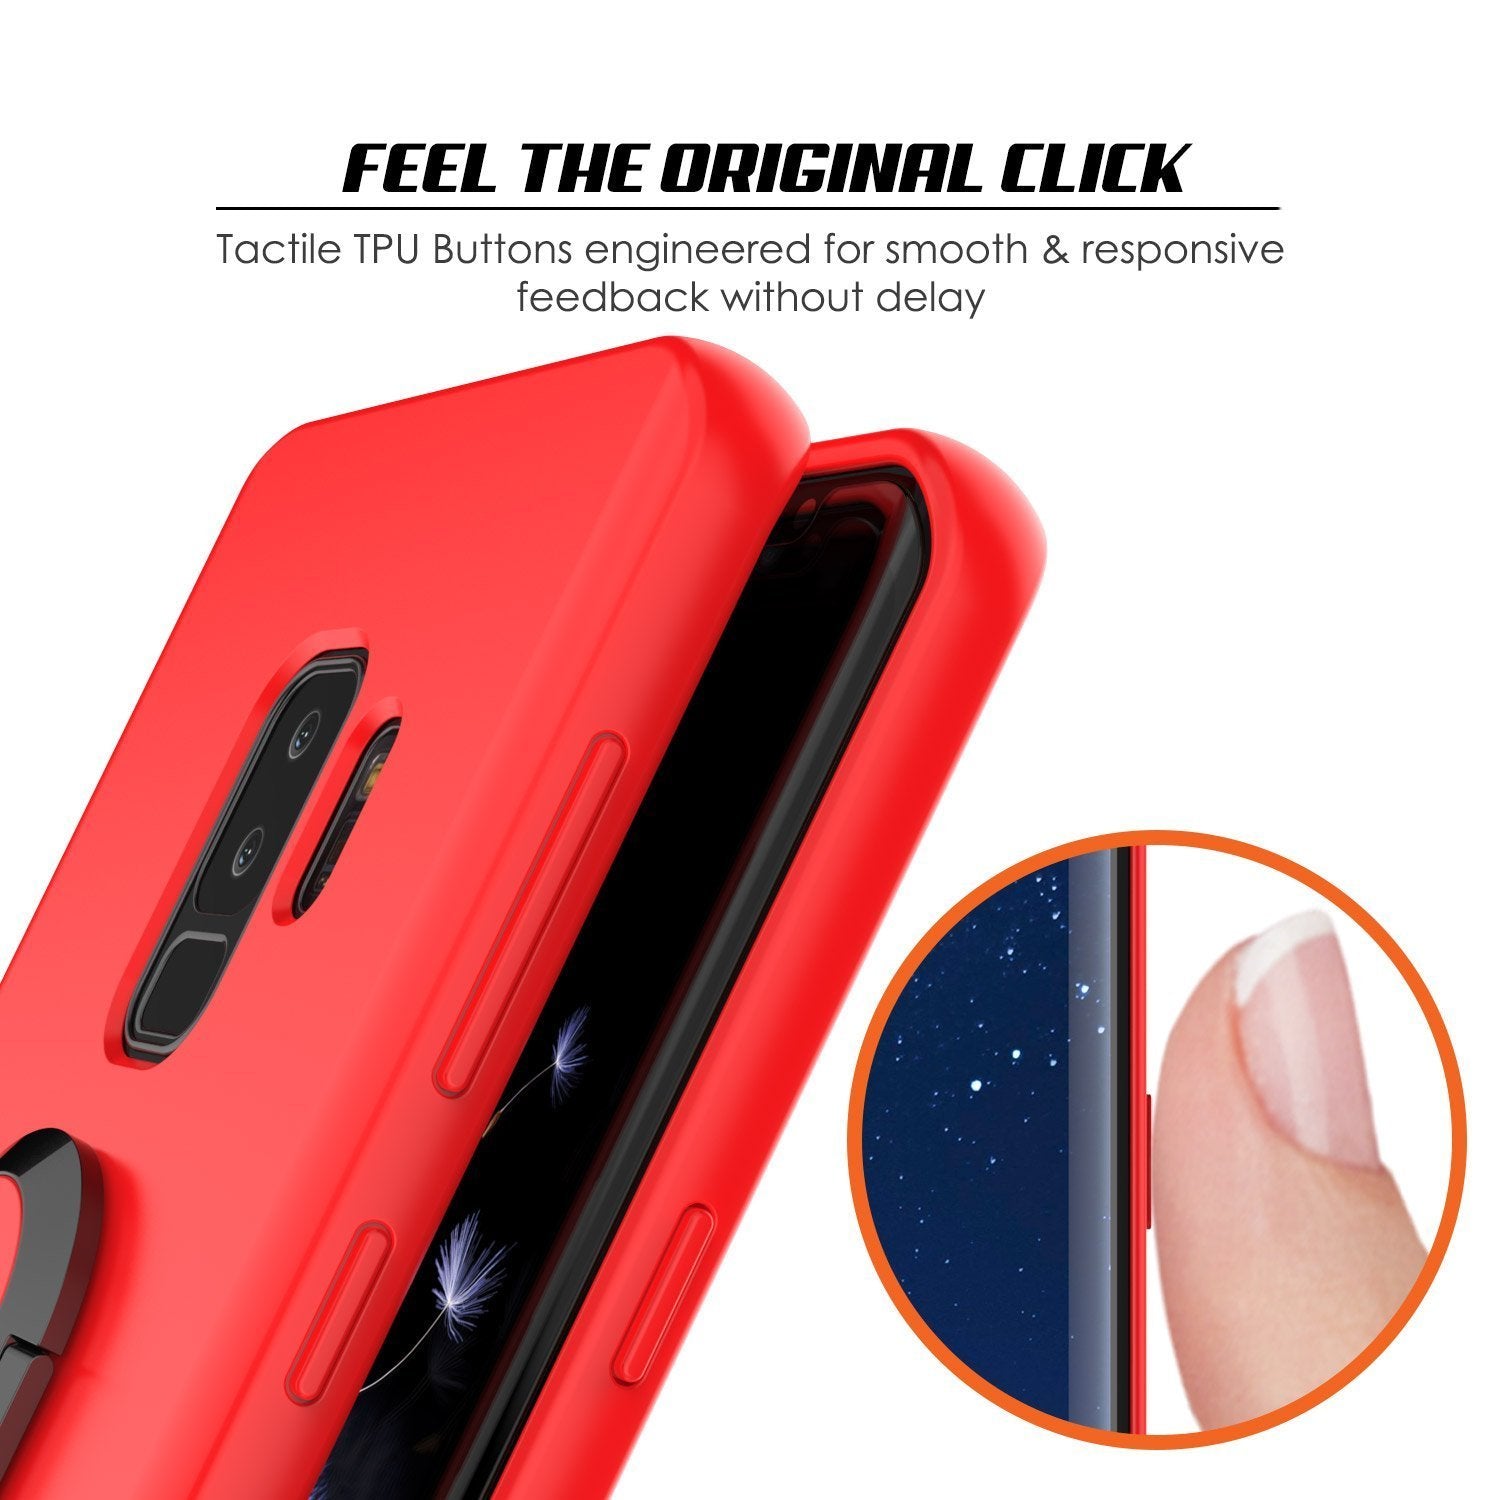 Galaxy S9 PLUS, Punkcase Magnetix Protective TPU Cover W/ Kickstand, Ring Grip Holder & Metal Plate for Magnetic Car Phone Mount PLUS PunkShield Screen Protector for Samsung S9+ Edge [Red]